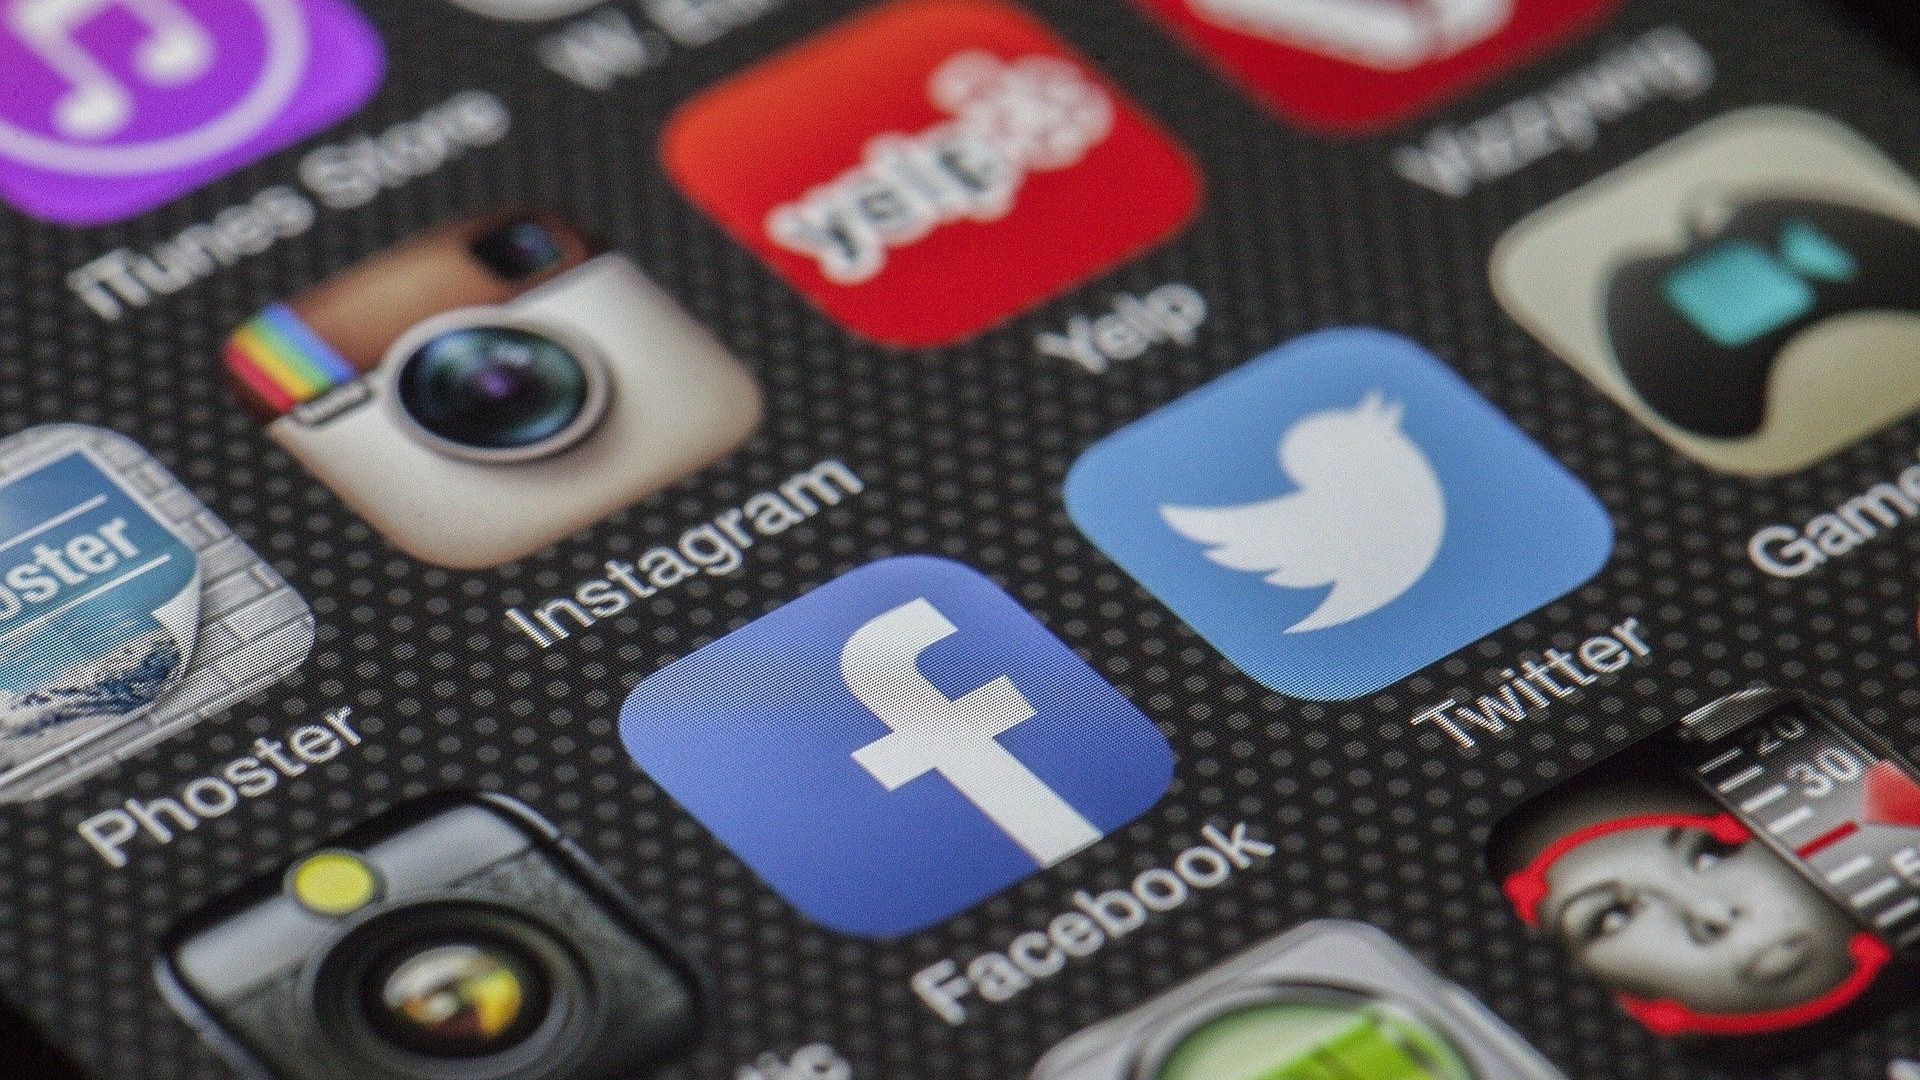 An image of a phone screen displaying social media apps